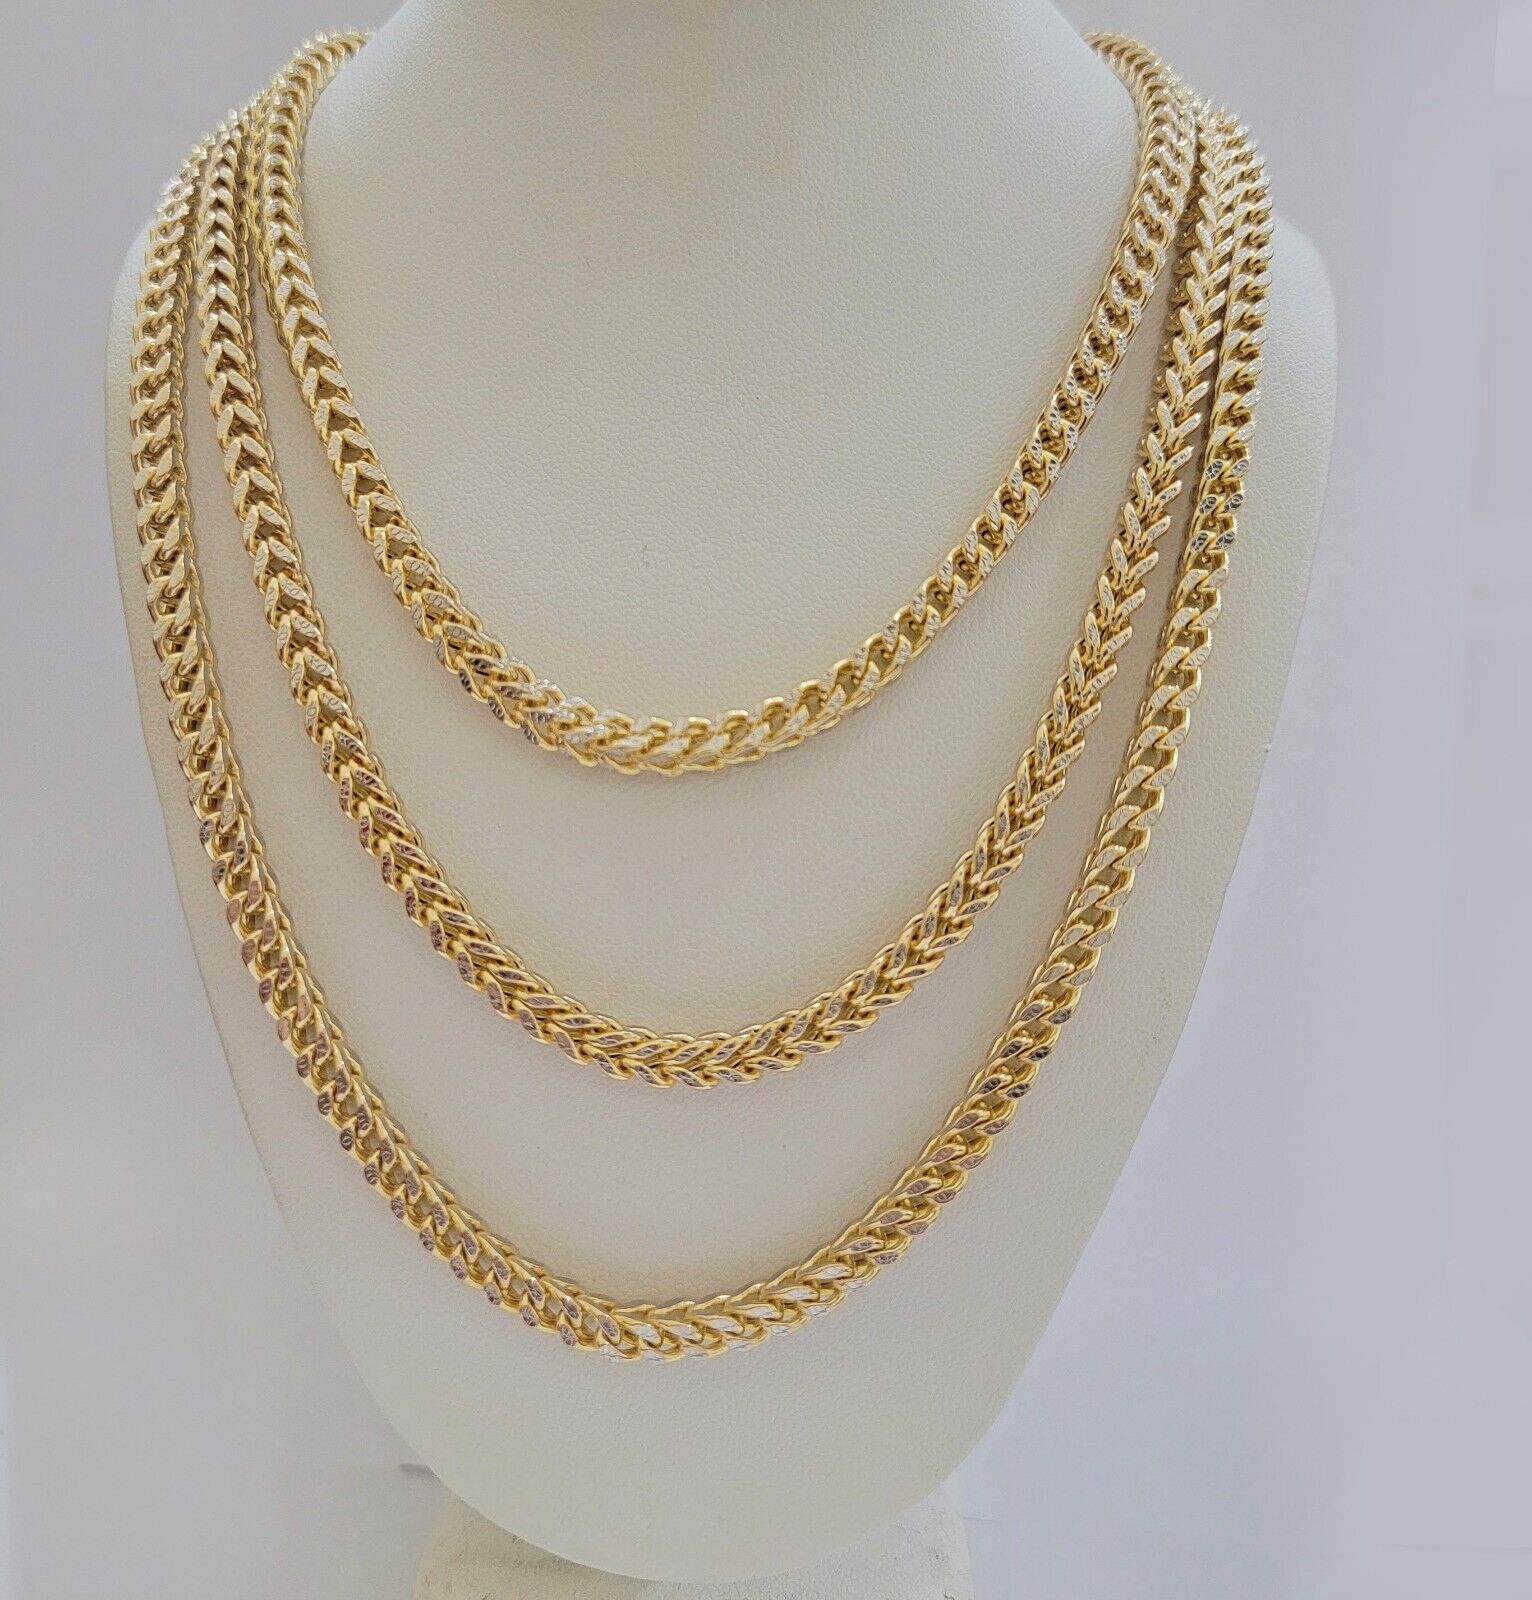 Real 14k Gold Chain Franco Necklace Diamond cuts 4mm 18